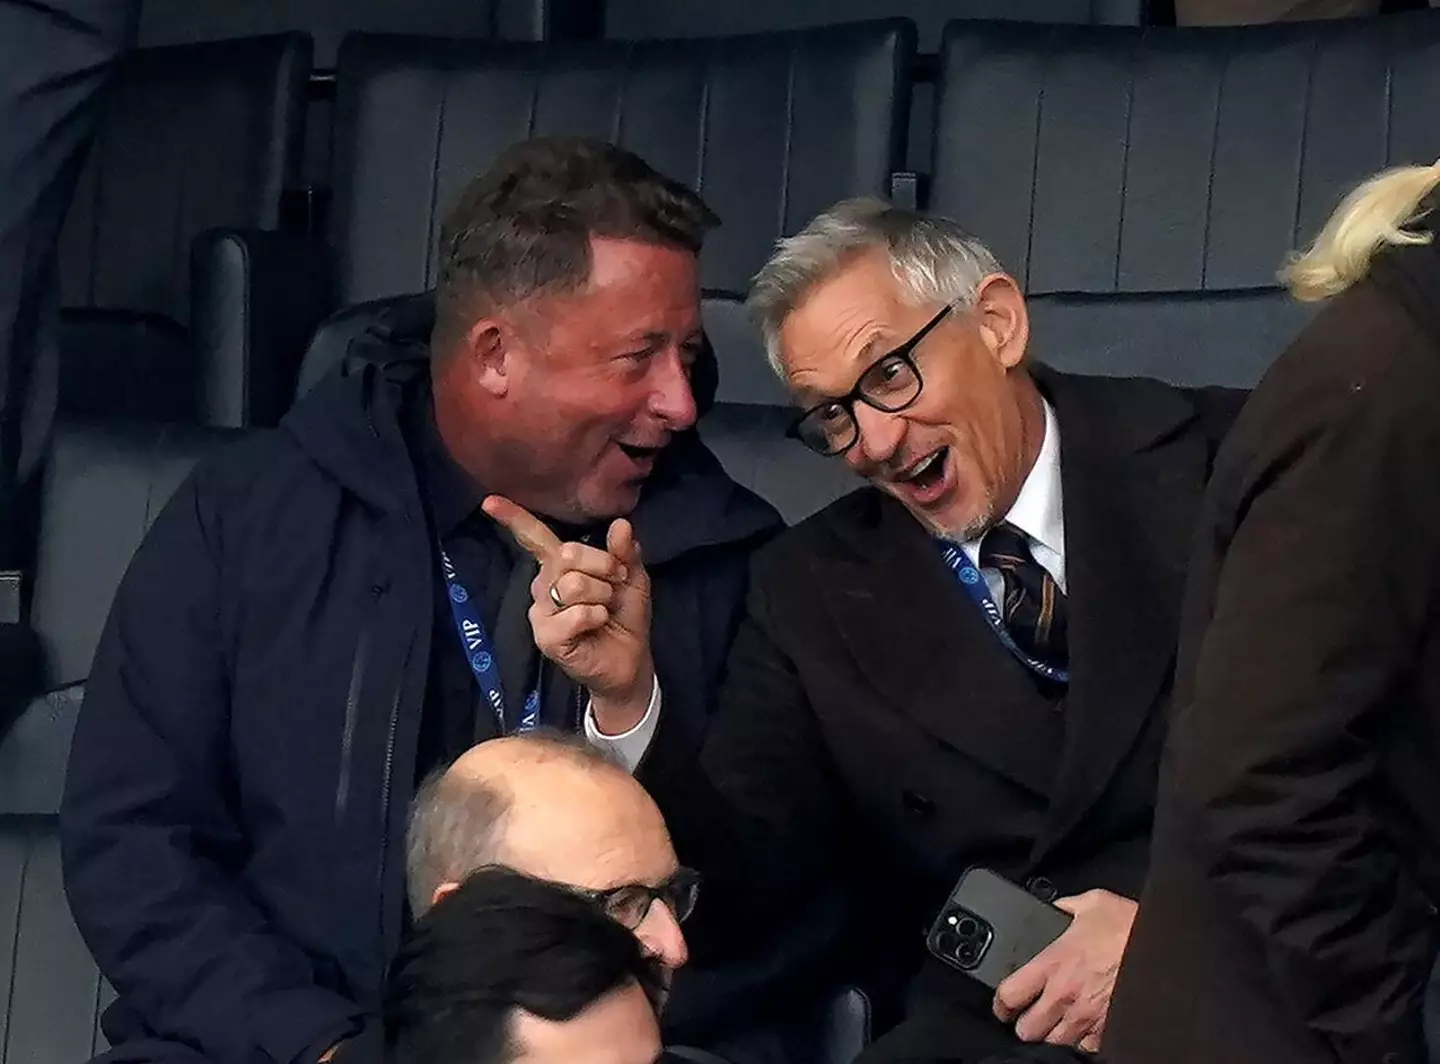 Lineker was at the Leicester City game on Saturday. Image: Alamy